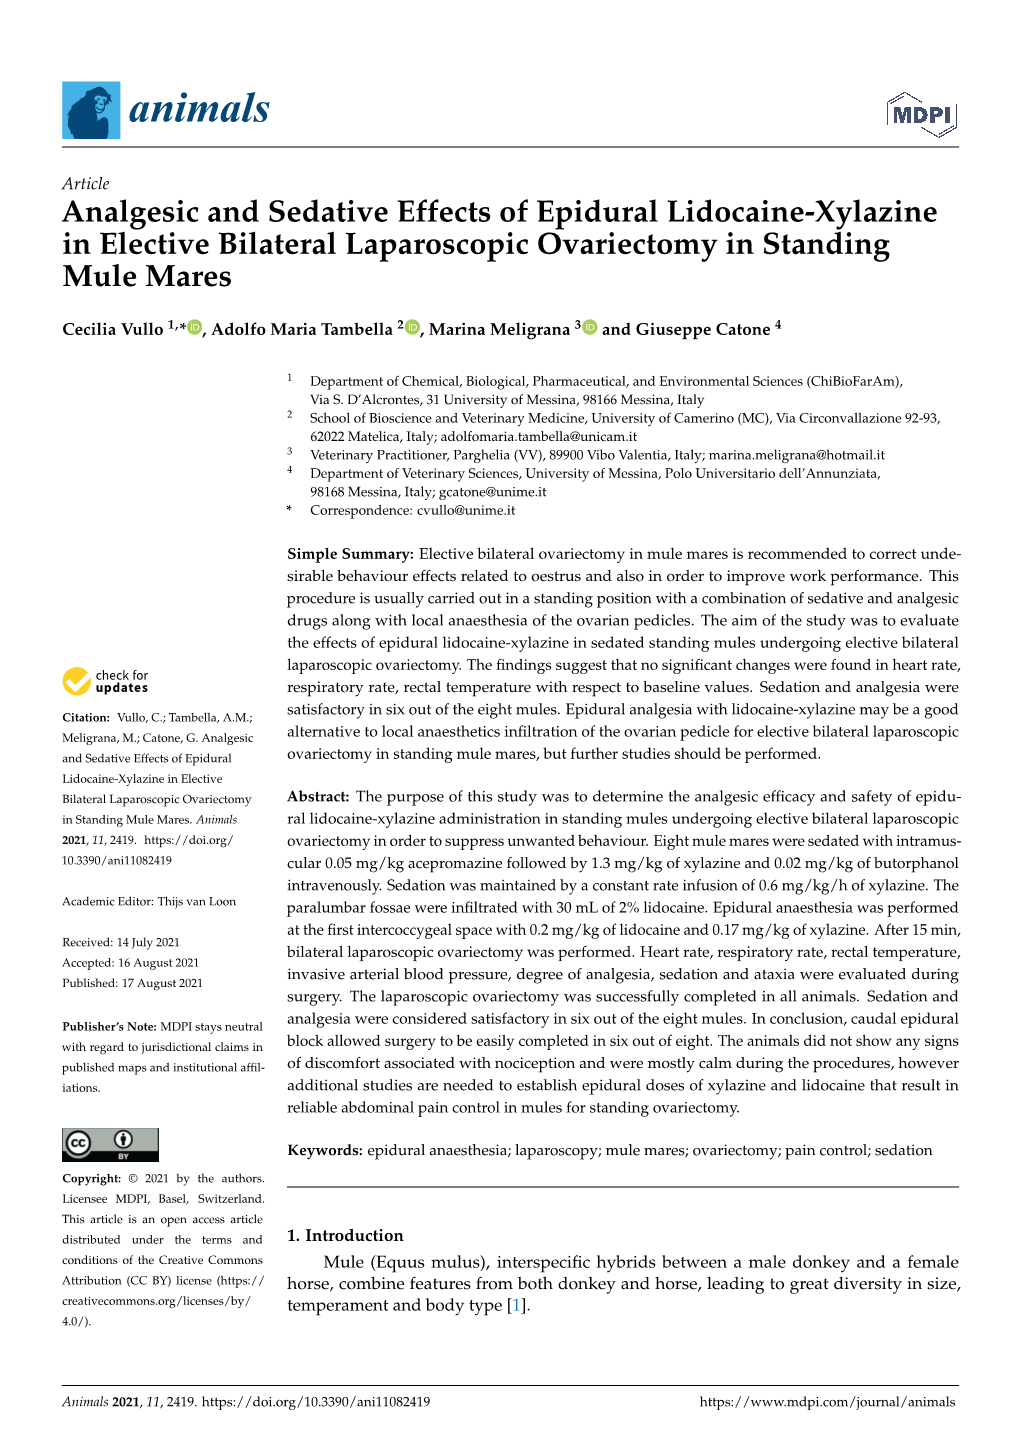 Analgesic and Sedative Effects of Epidural Lidocaine-Xylazine in Elective Bilateral Laparoscopic Ovariectomy in Standing Mule Mares